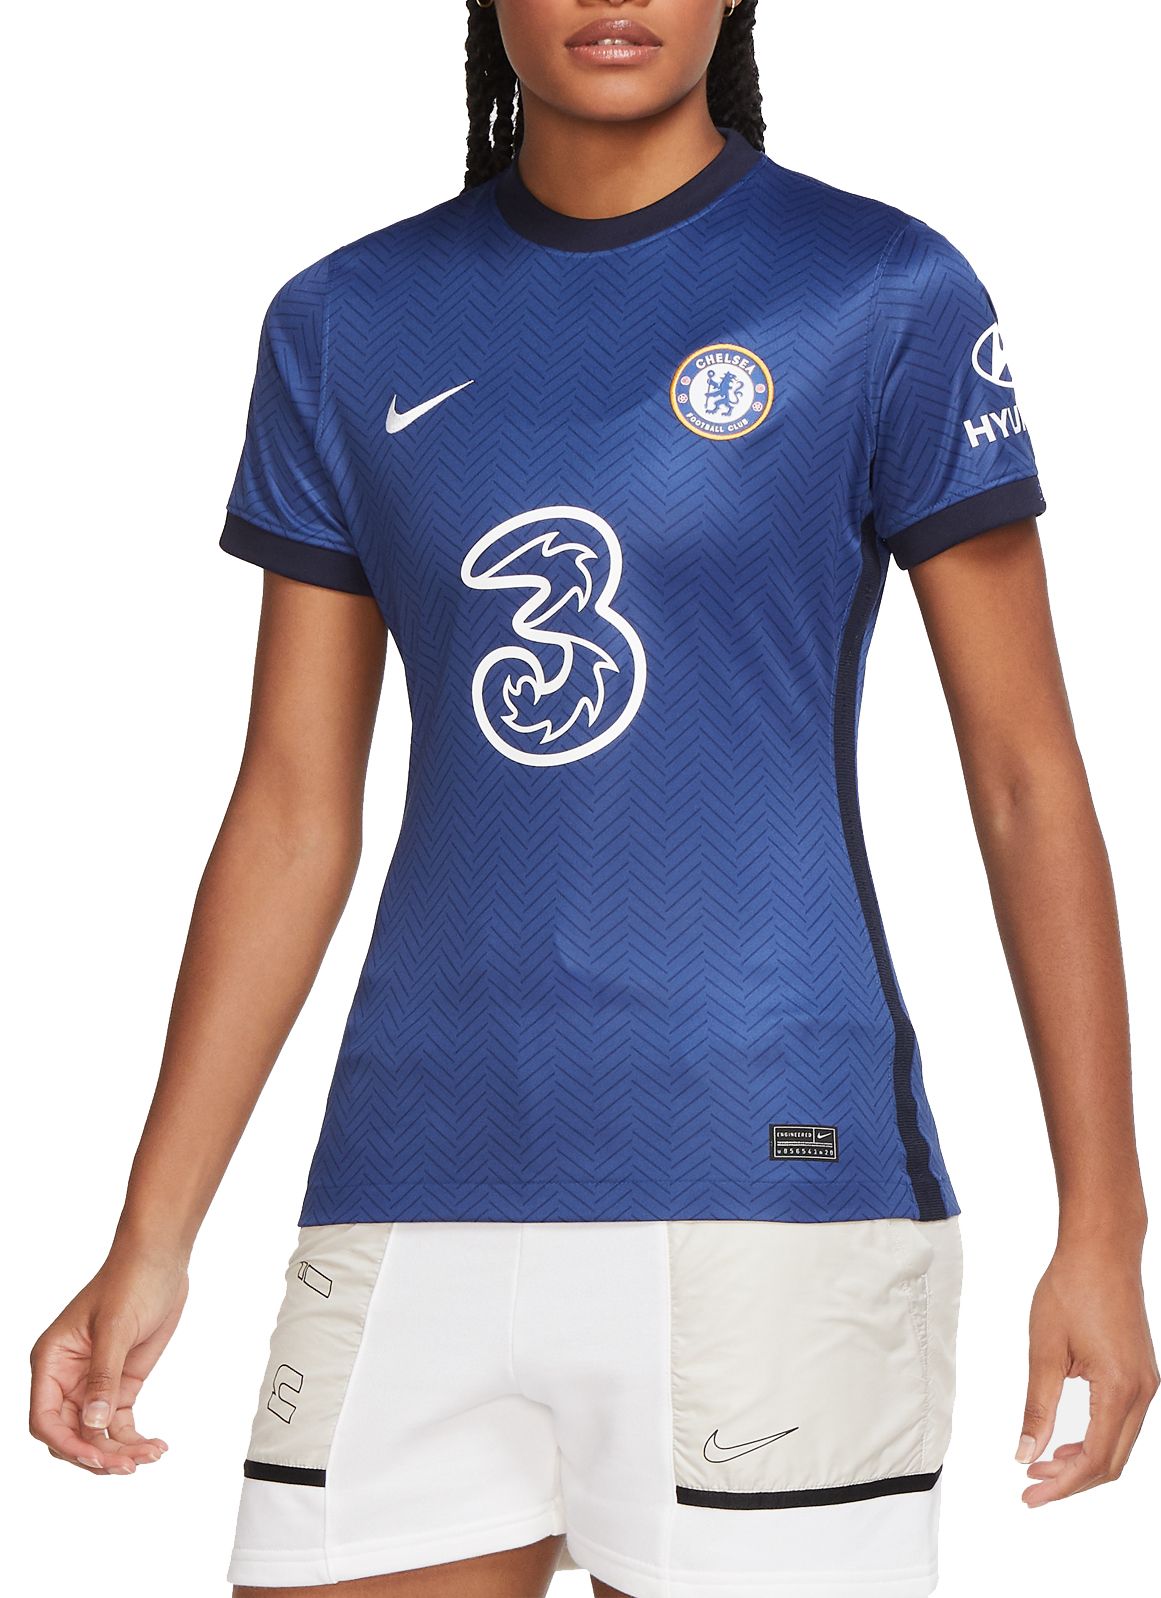 Female Chelsea Jersey Cheap Sale, SAVE 37% 